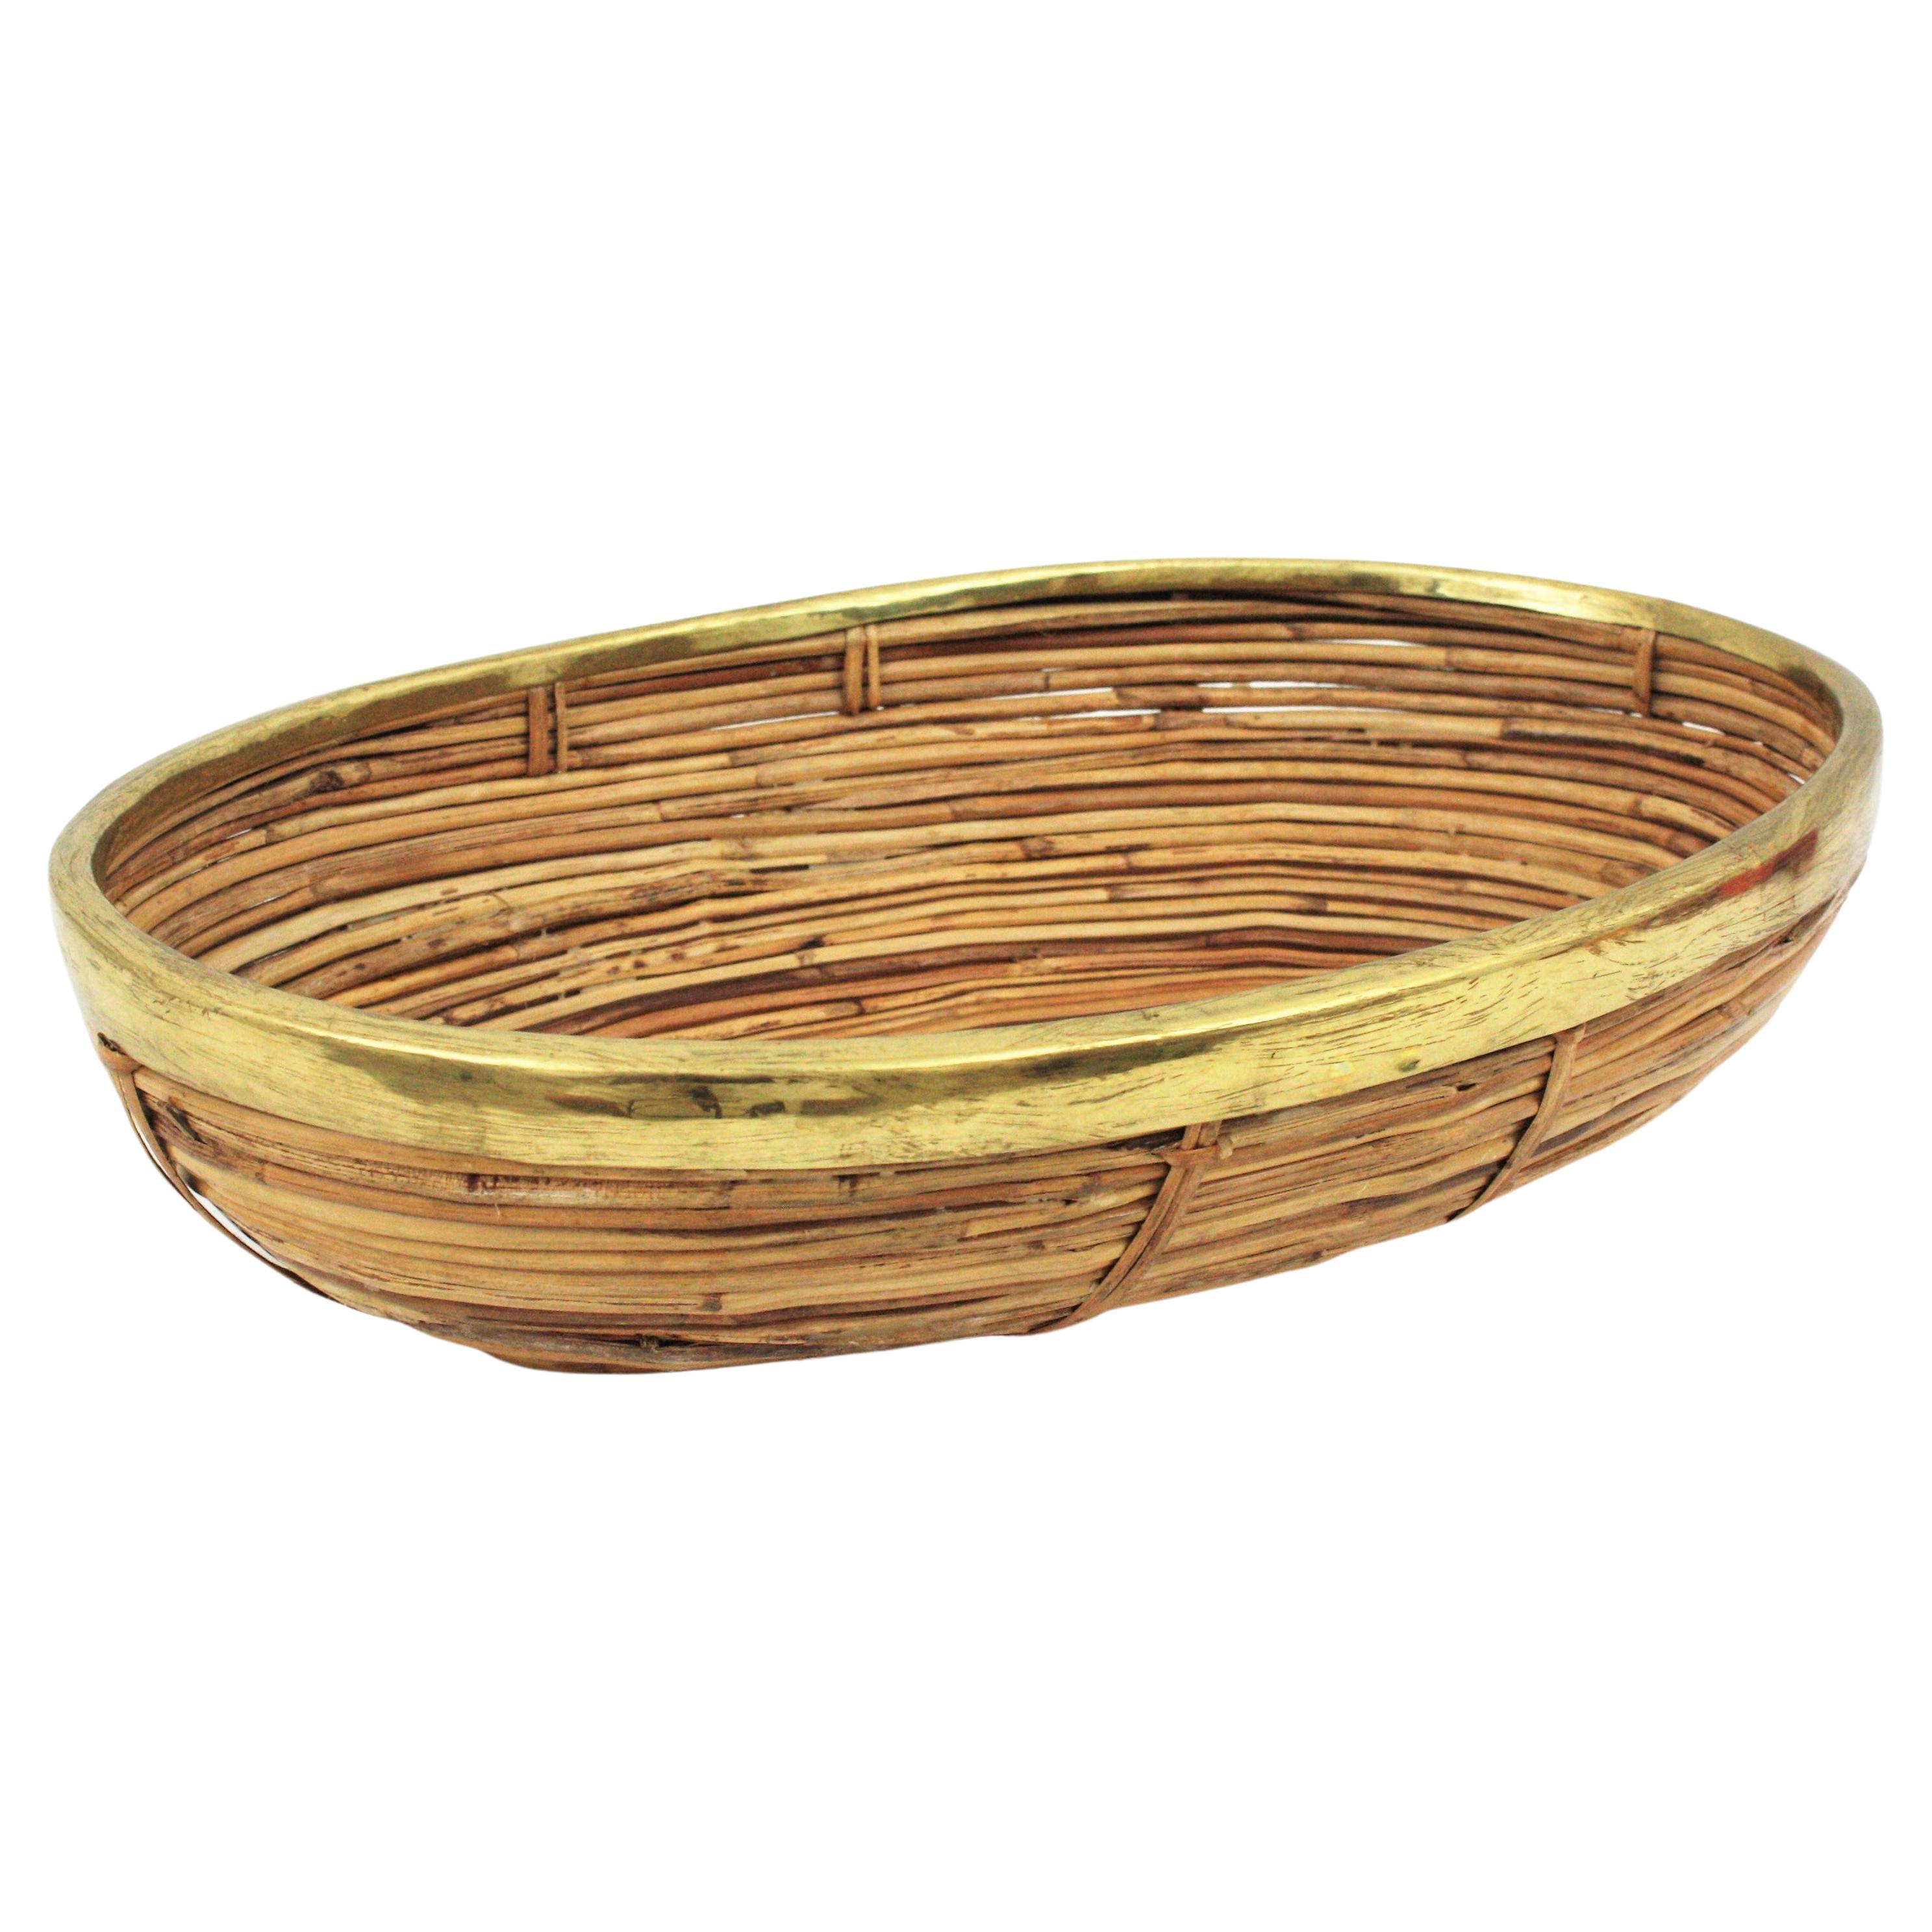 Rattan and Brass Italian Large Oval Basket Centerpiece Bowl, 1970s For Sale 12